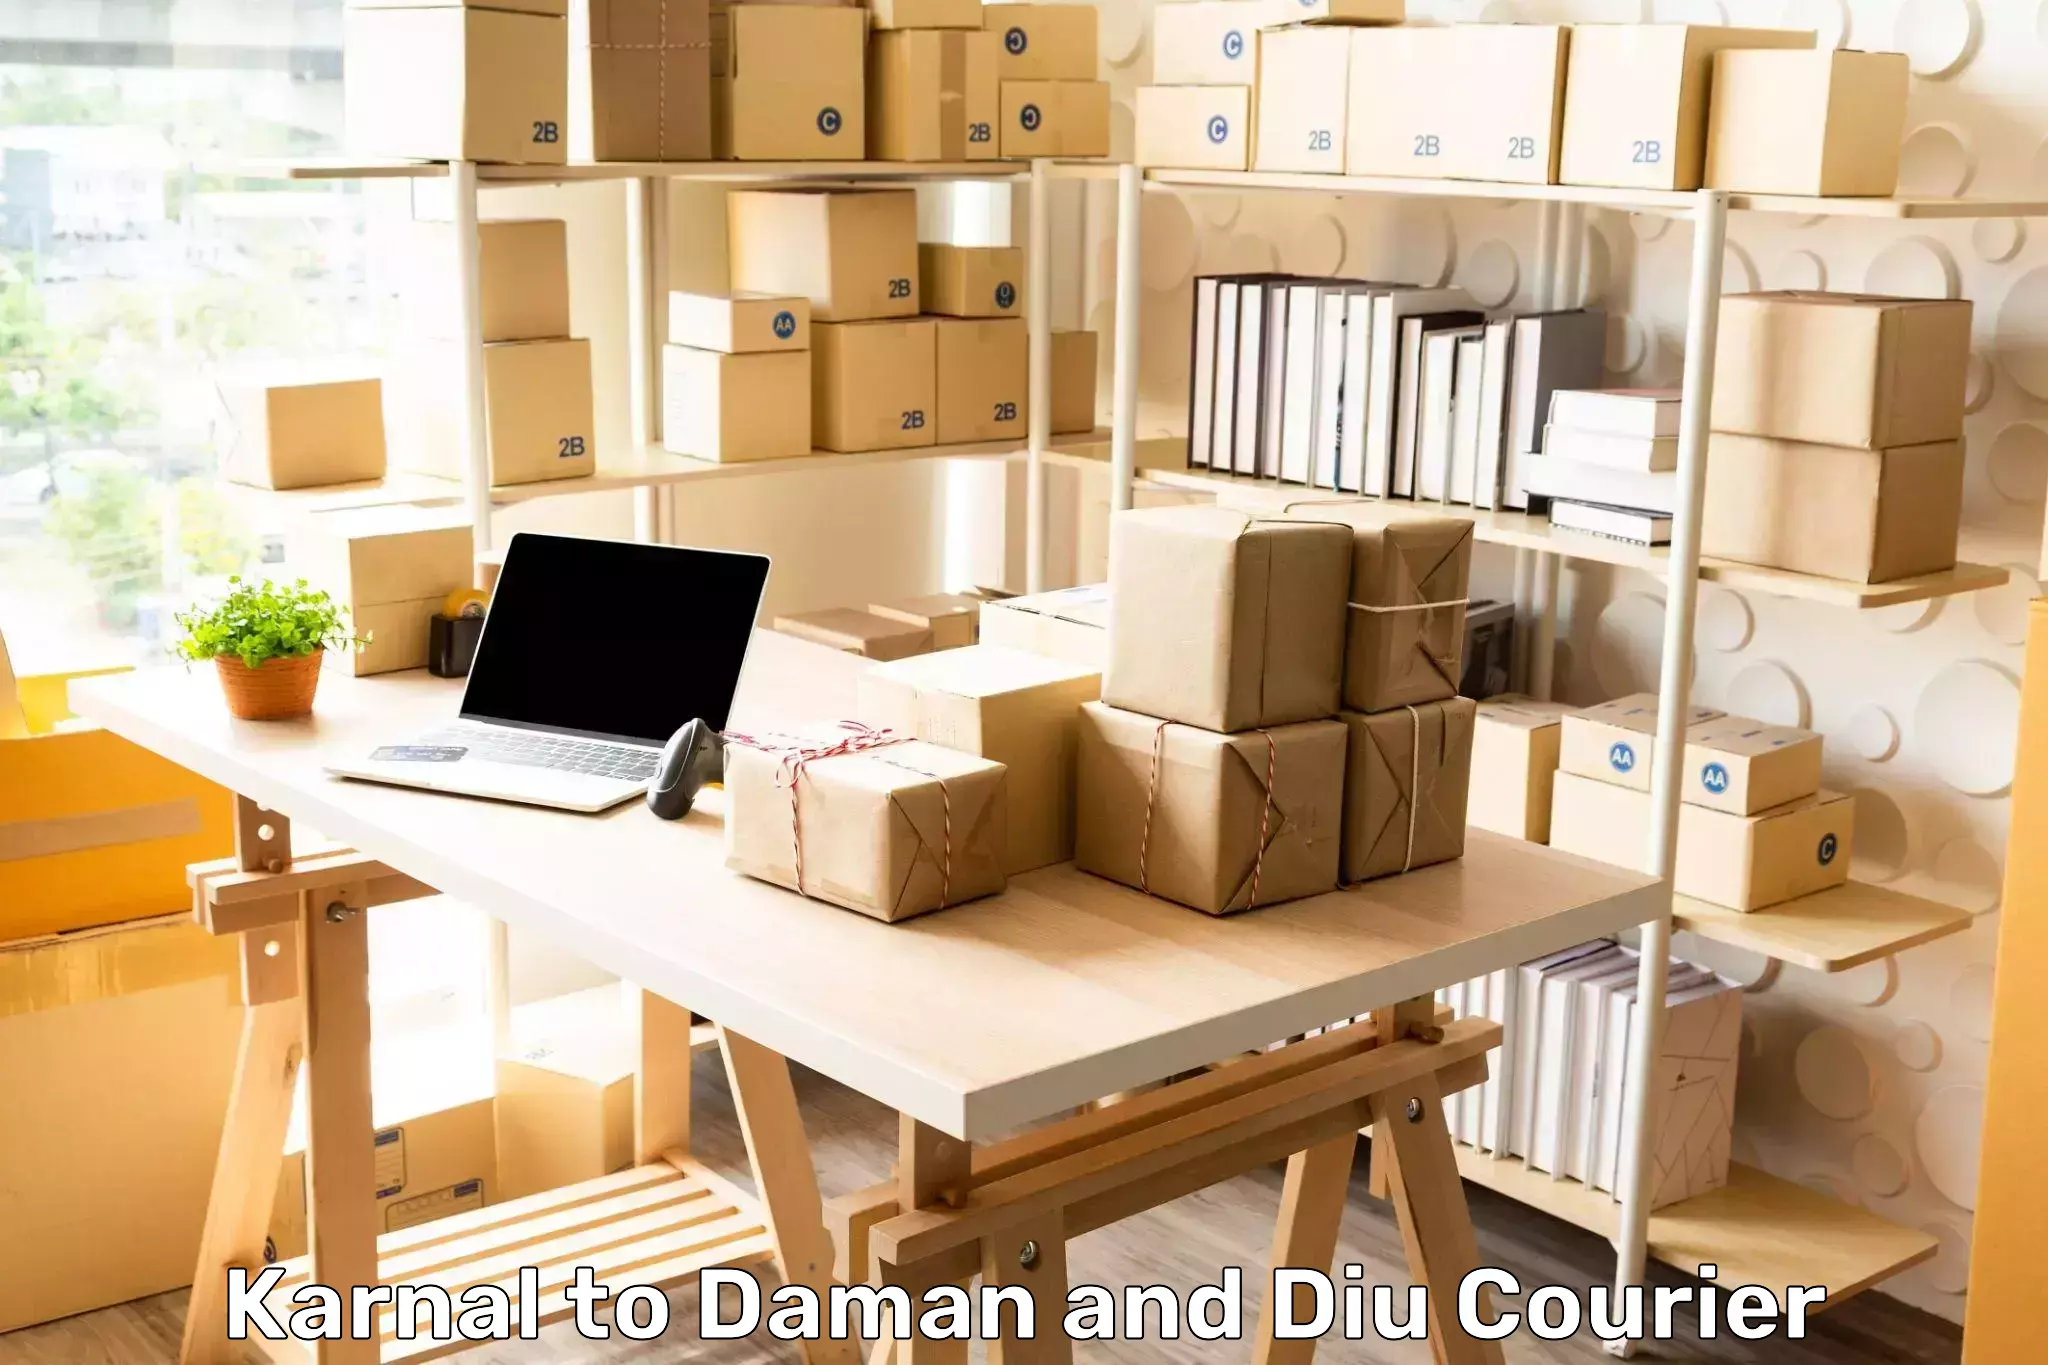 Express delivery capabilities Karnal to Daman